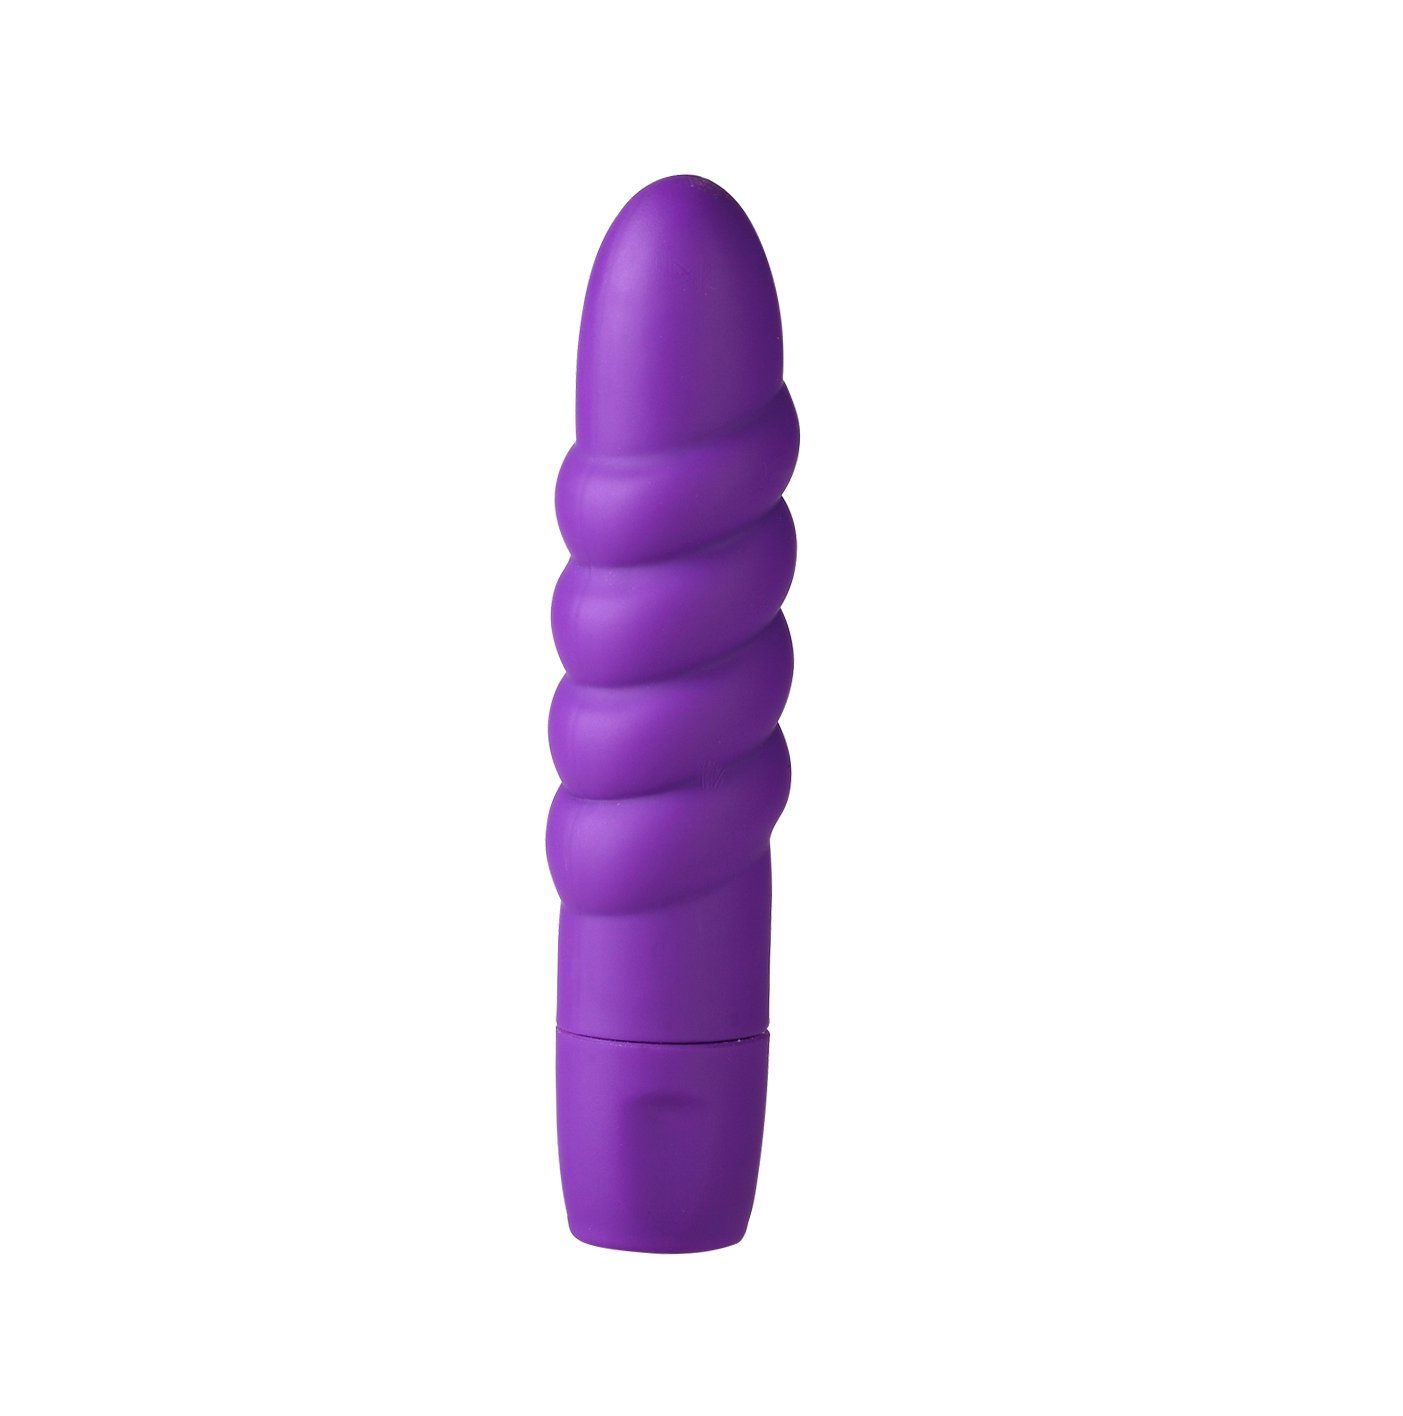 Maia sugr - bullet vibrator - Product front view  | Flirtybay.com.au